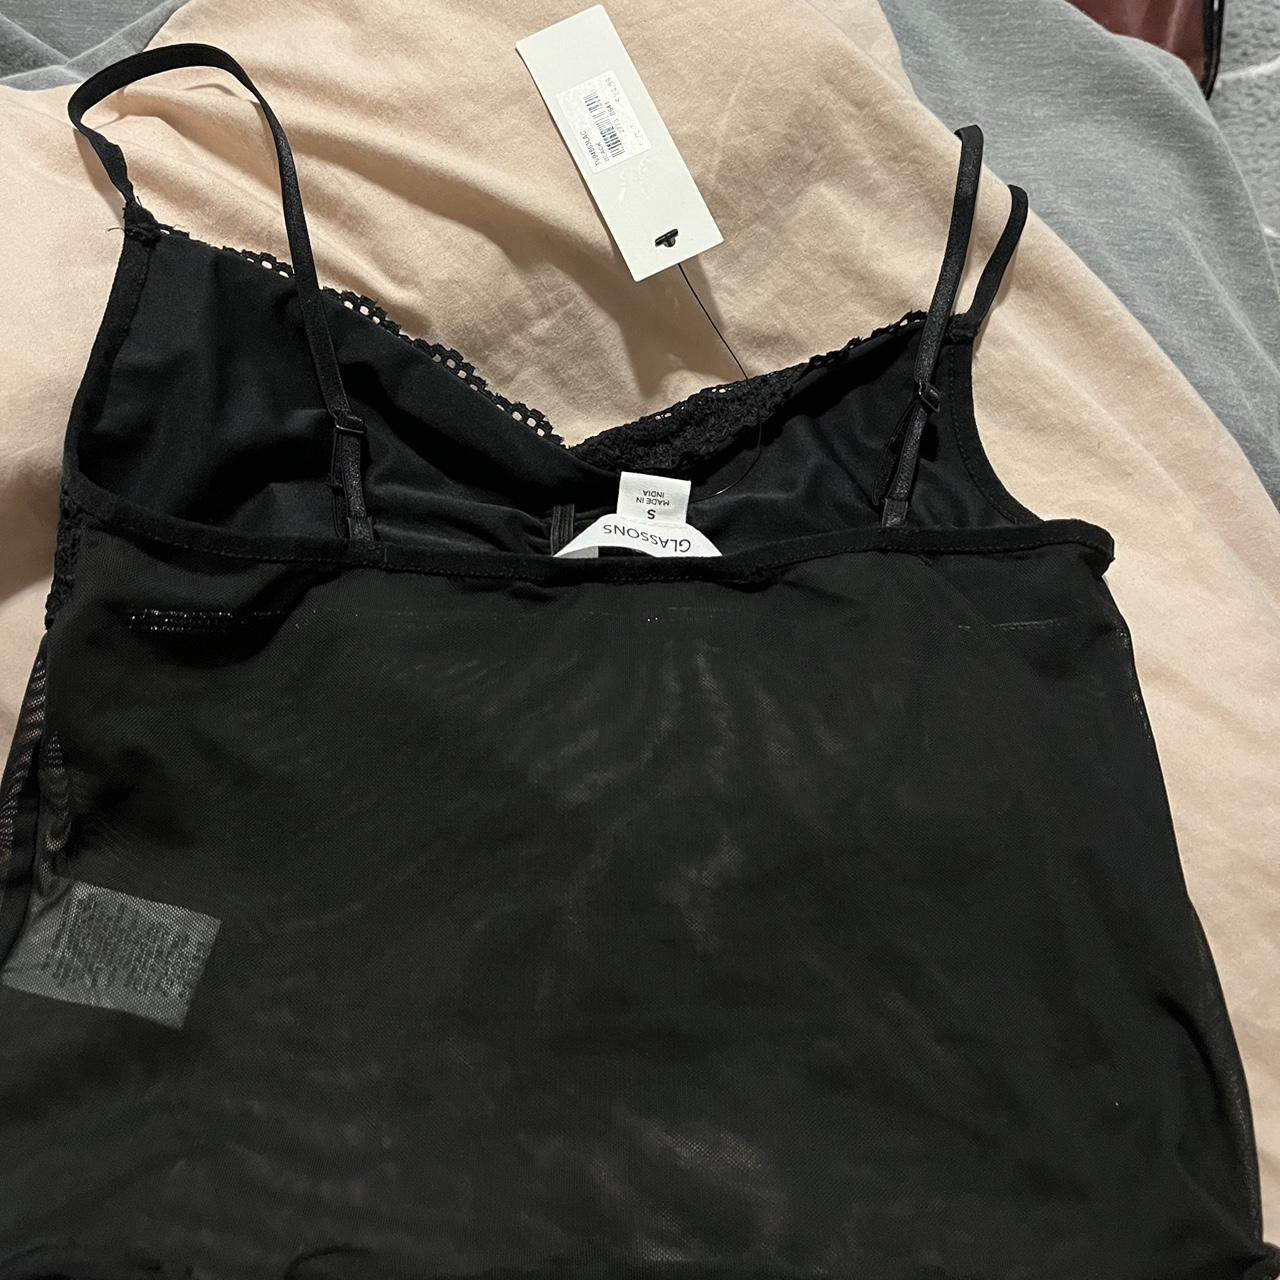 BNWT black lace cami top from Glassons, size small.... - Depop